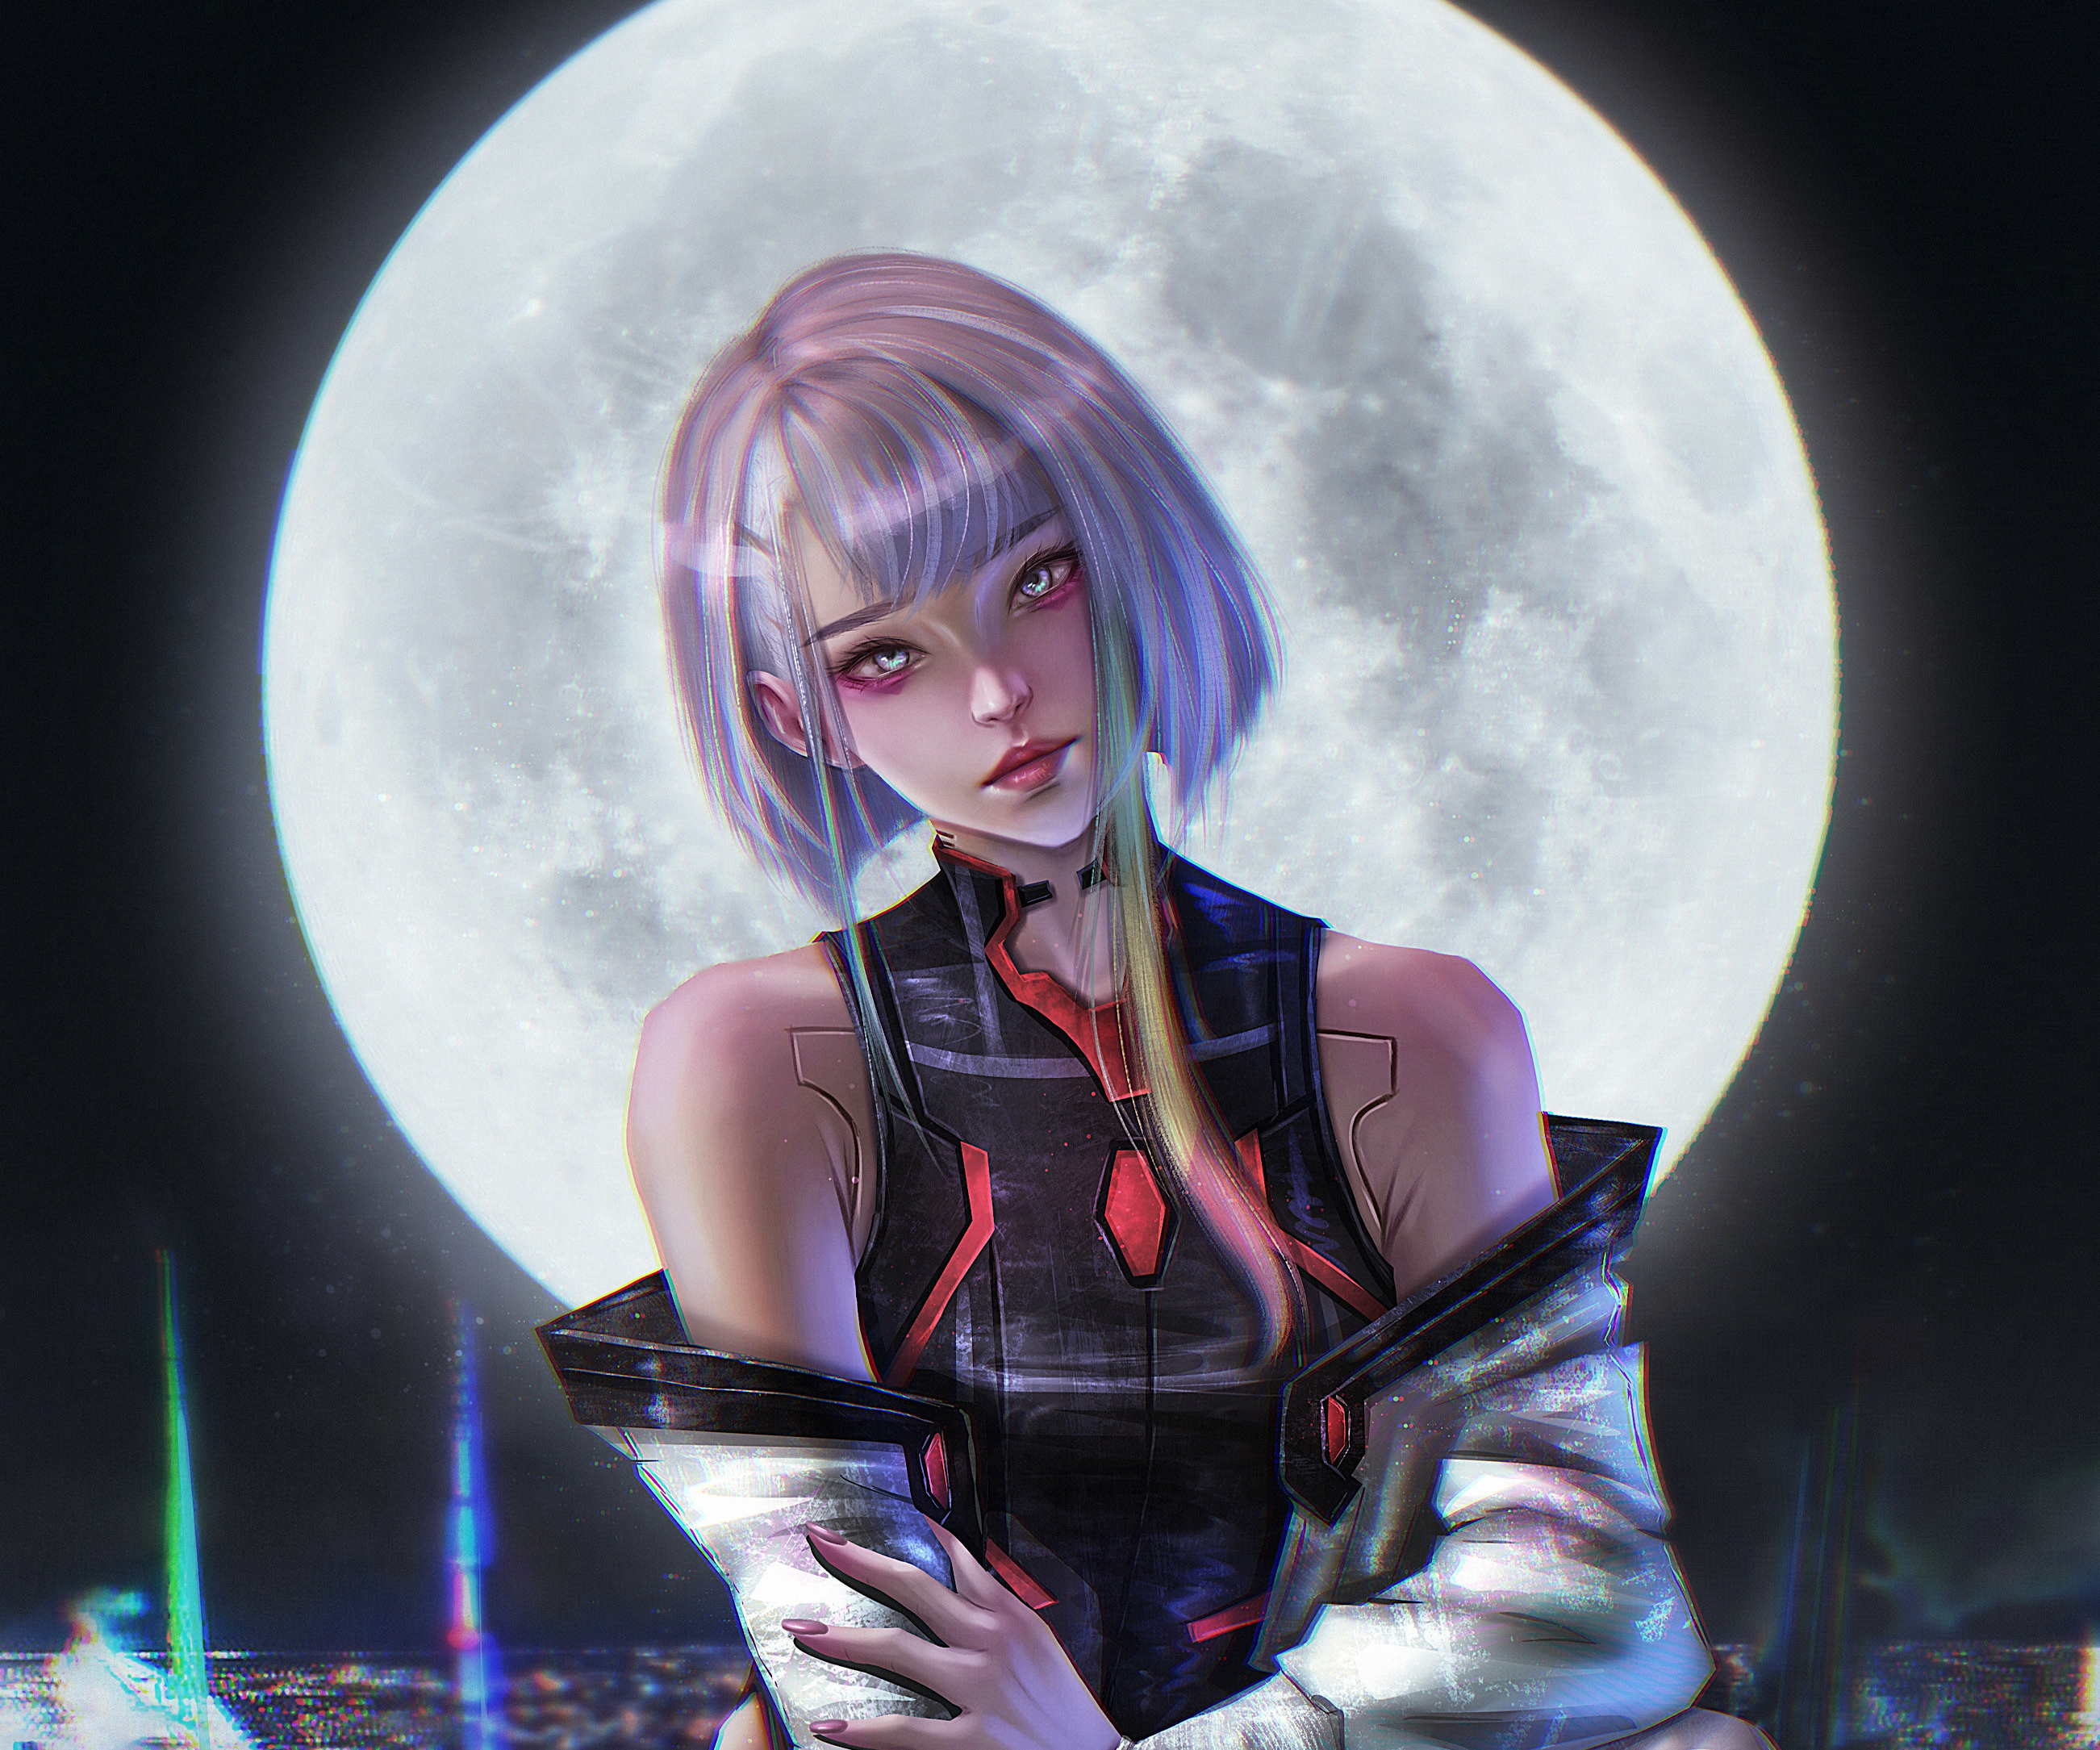 190+ Lucy (Cyberpunk: Edgerunners) HD Wallpapers and Backgrounds